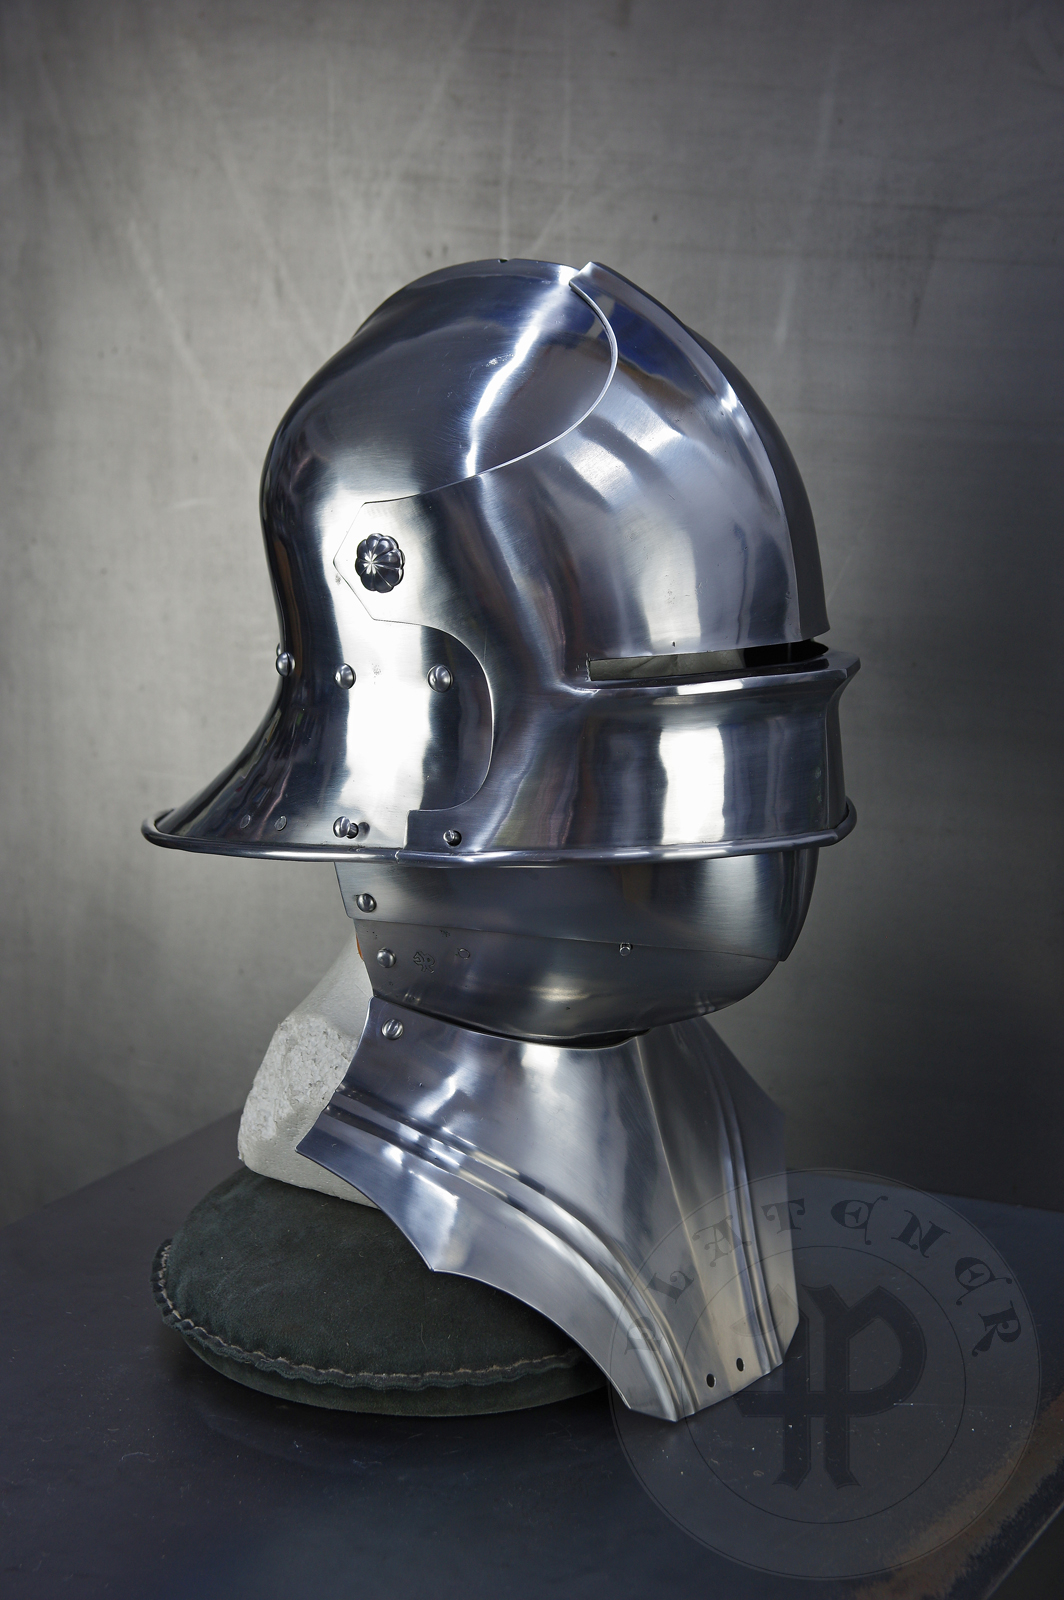 Sallet inspired by example from the Philadelphia Museum of Art; bevor inspired on Churburg CHS25 piece. Period: 1460-1470 Material: 2 mm steel with 0,3 % carbon. Heat treatment: sallet hardened and tempered up to 38 HRC and bevor up to 42 HRC. / Salada inspirowana na originale z Philadelphia Museum of Art; podbrdek oparty na oryginale z Churburga CHS25. Salada hartowana i odpuszczana do 38 HRC a podbrdek do 42 HRC.